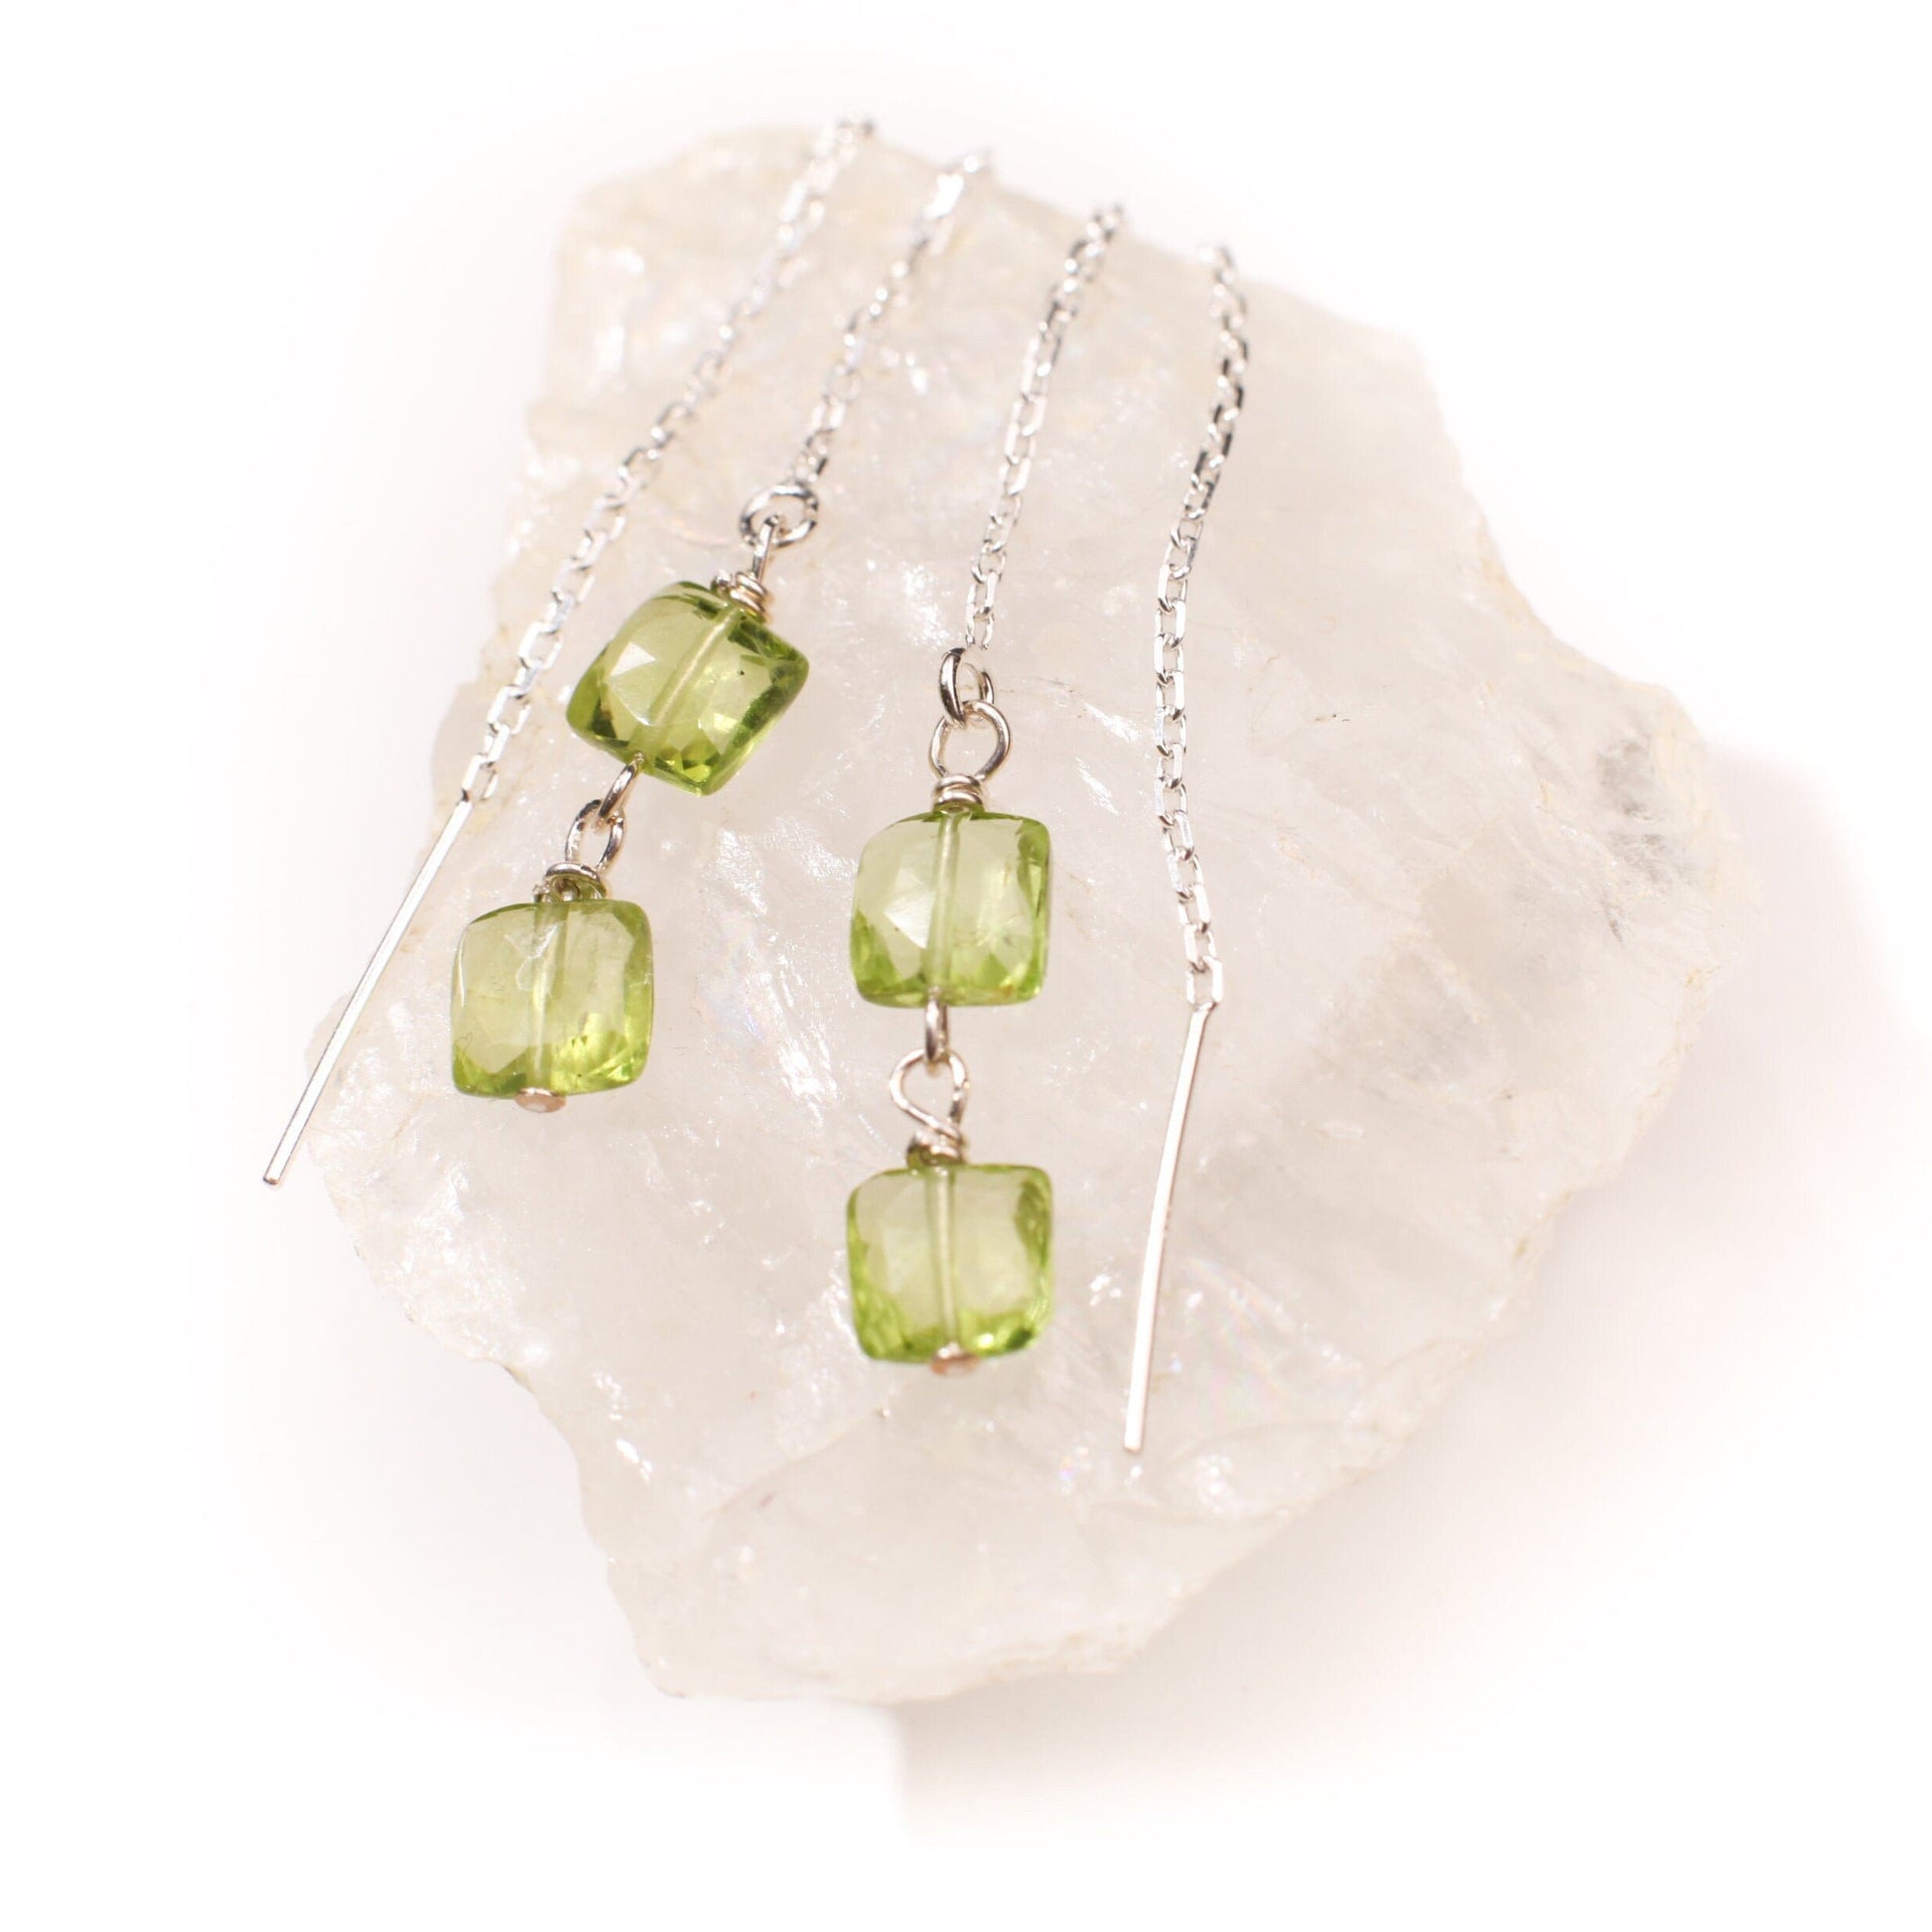 Peridot Faceted 6x6mm Square Cushion Shape in 925 Sterling Silver 65mm Long Threader Earrings, Gifts